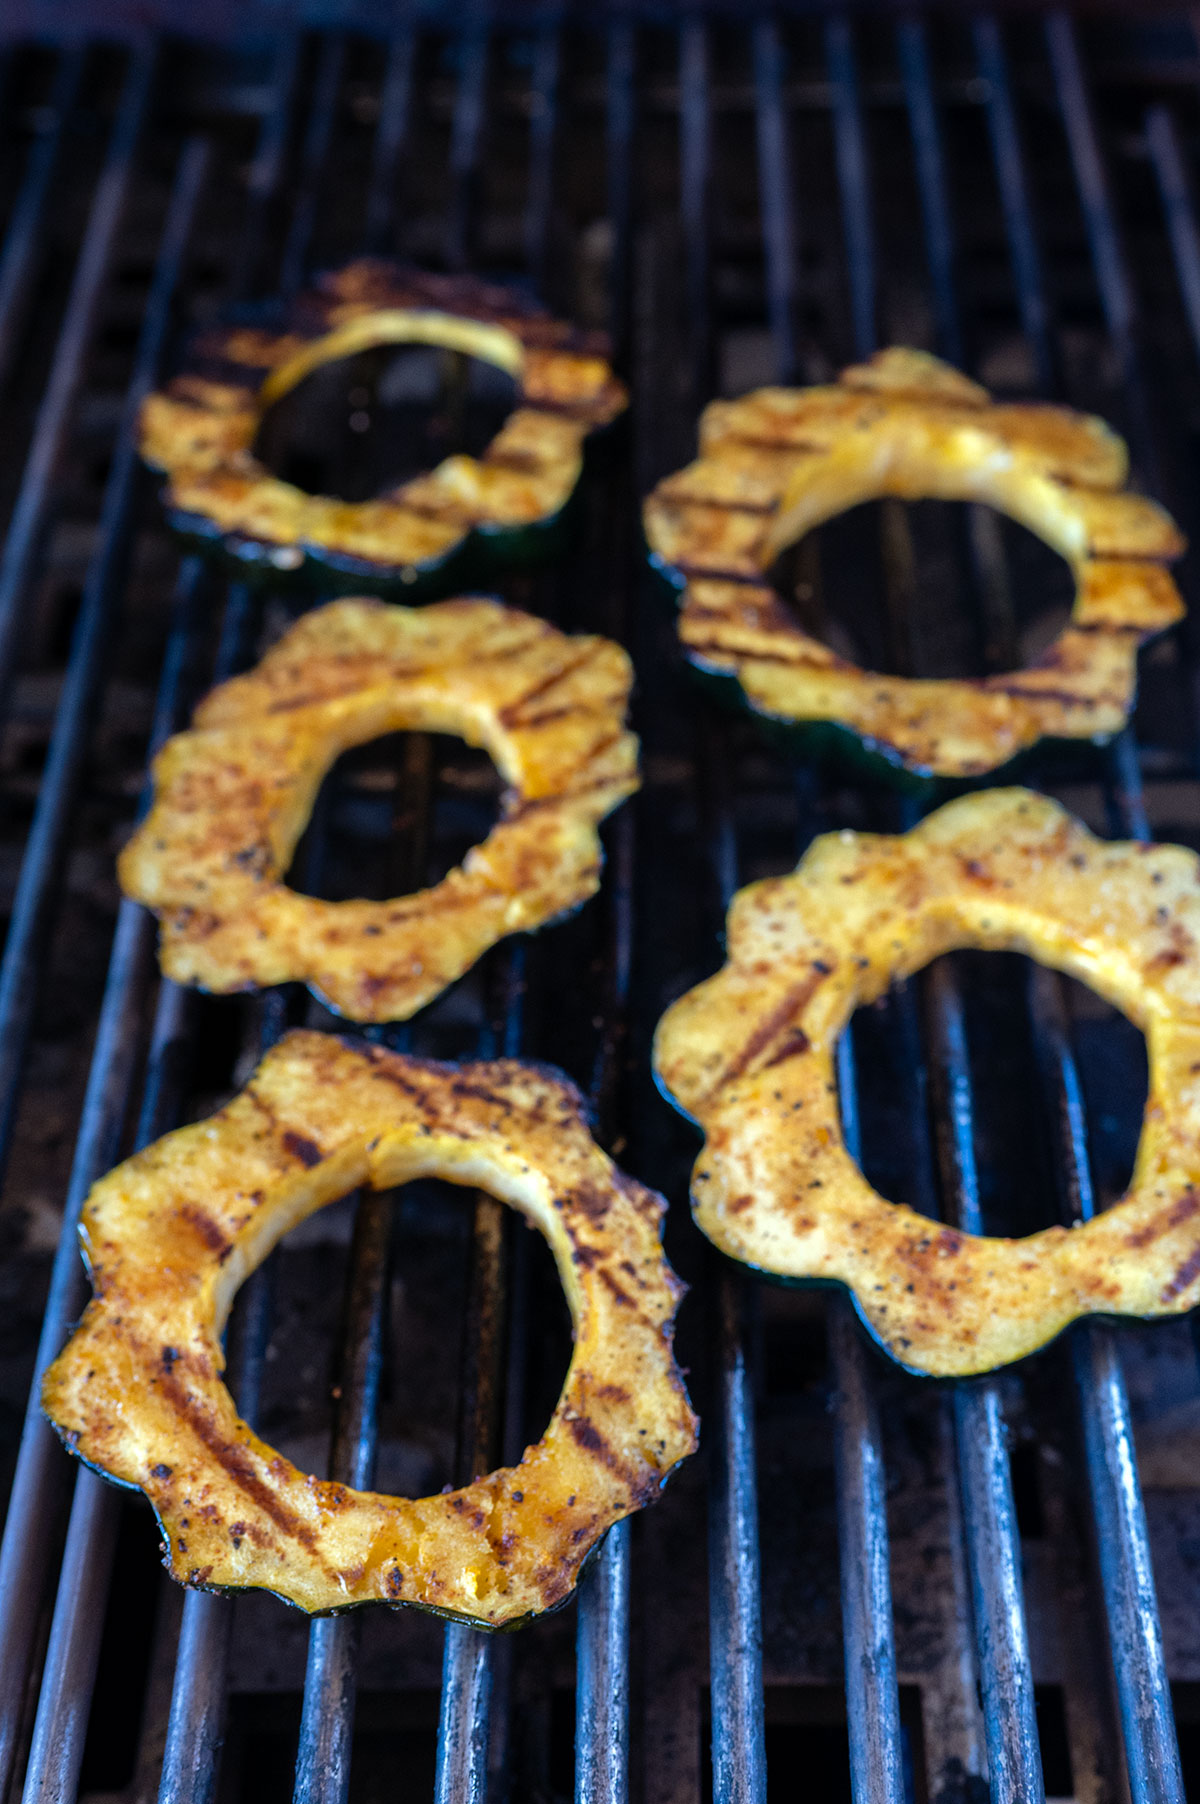 acorn squash on grill with grill marks.